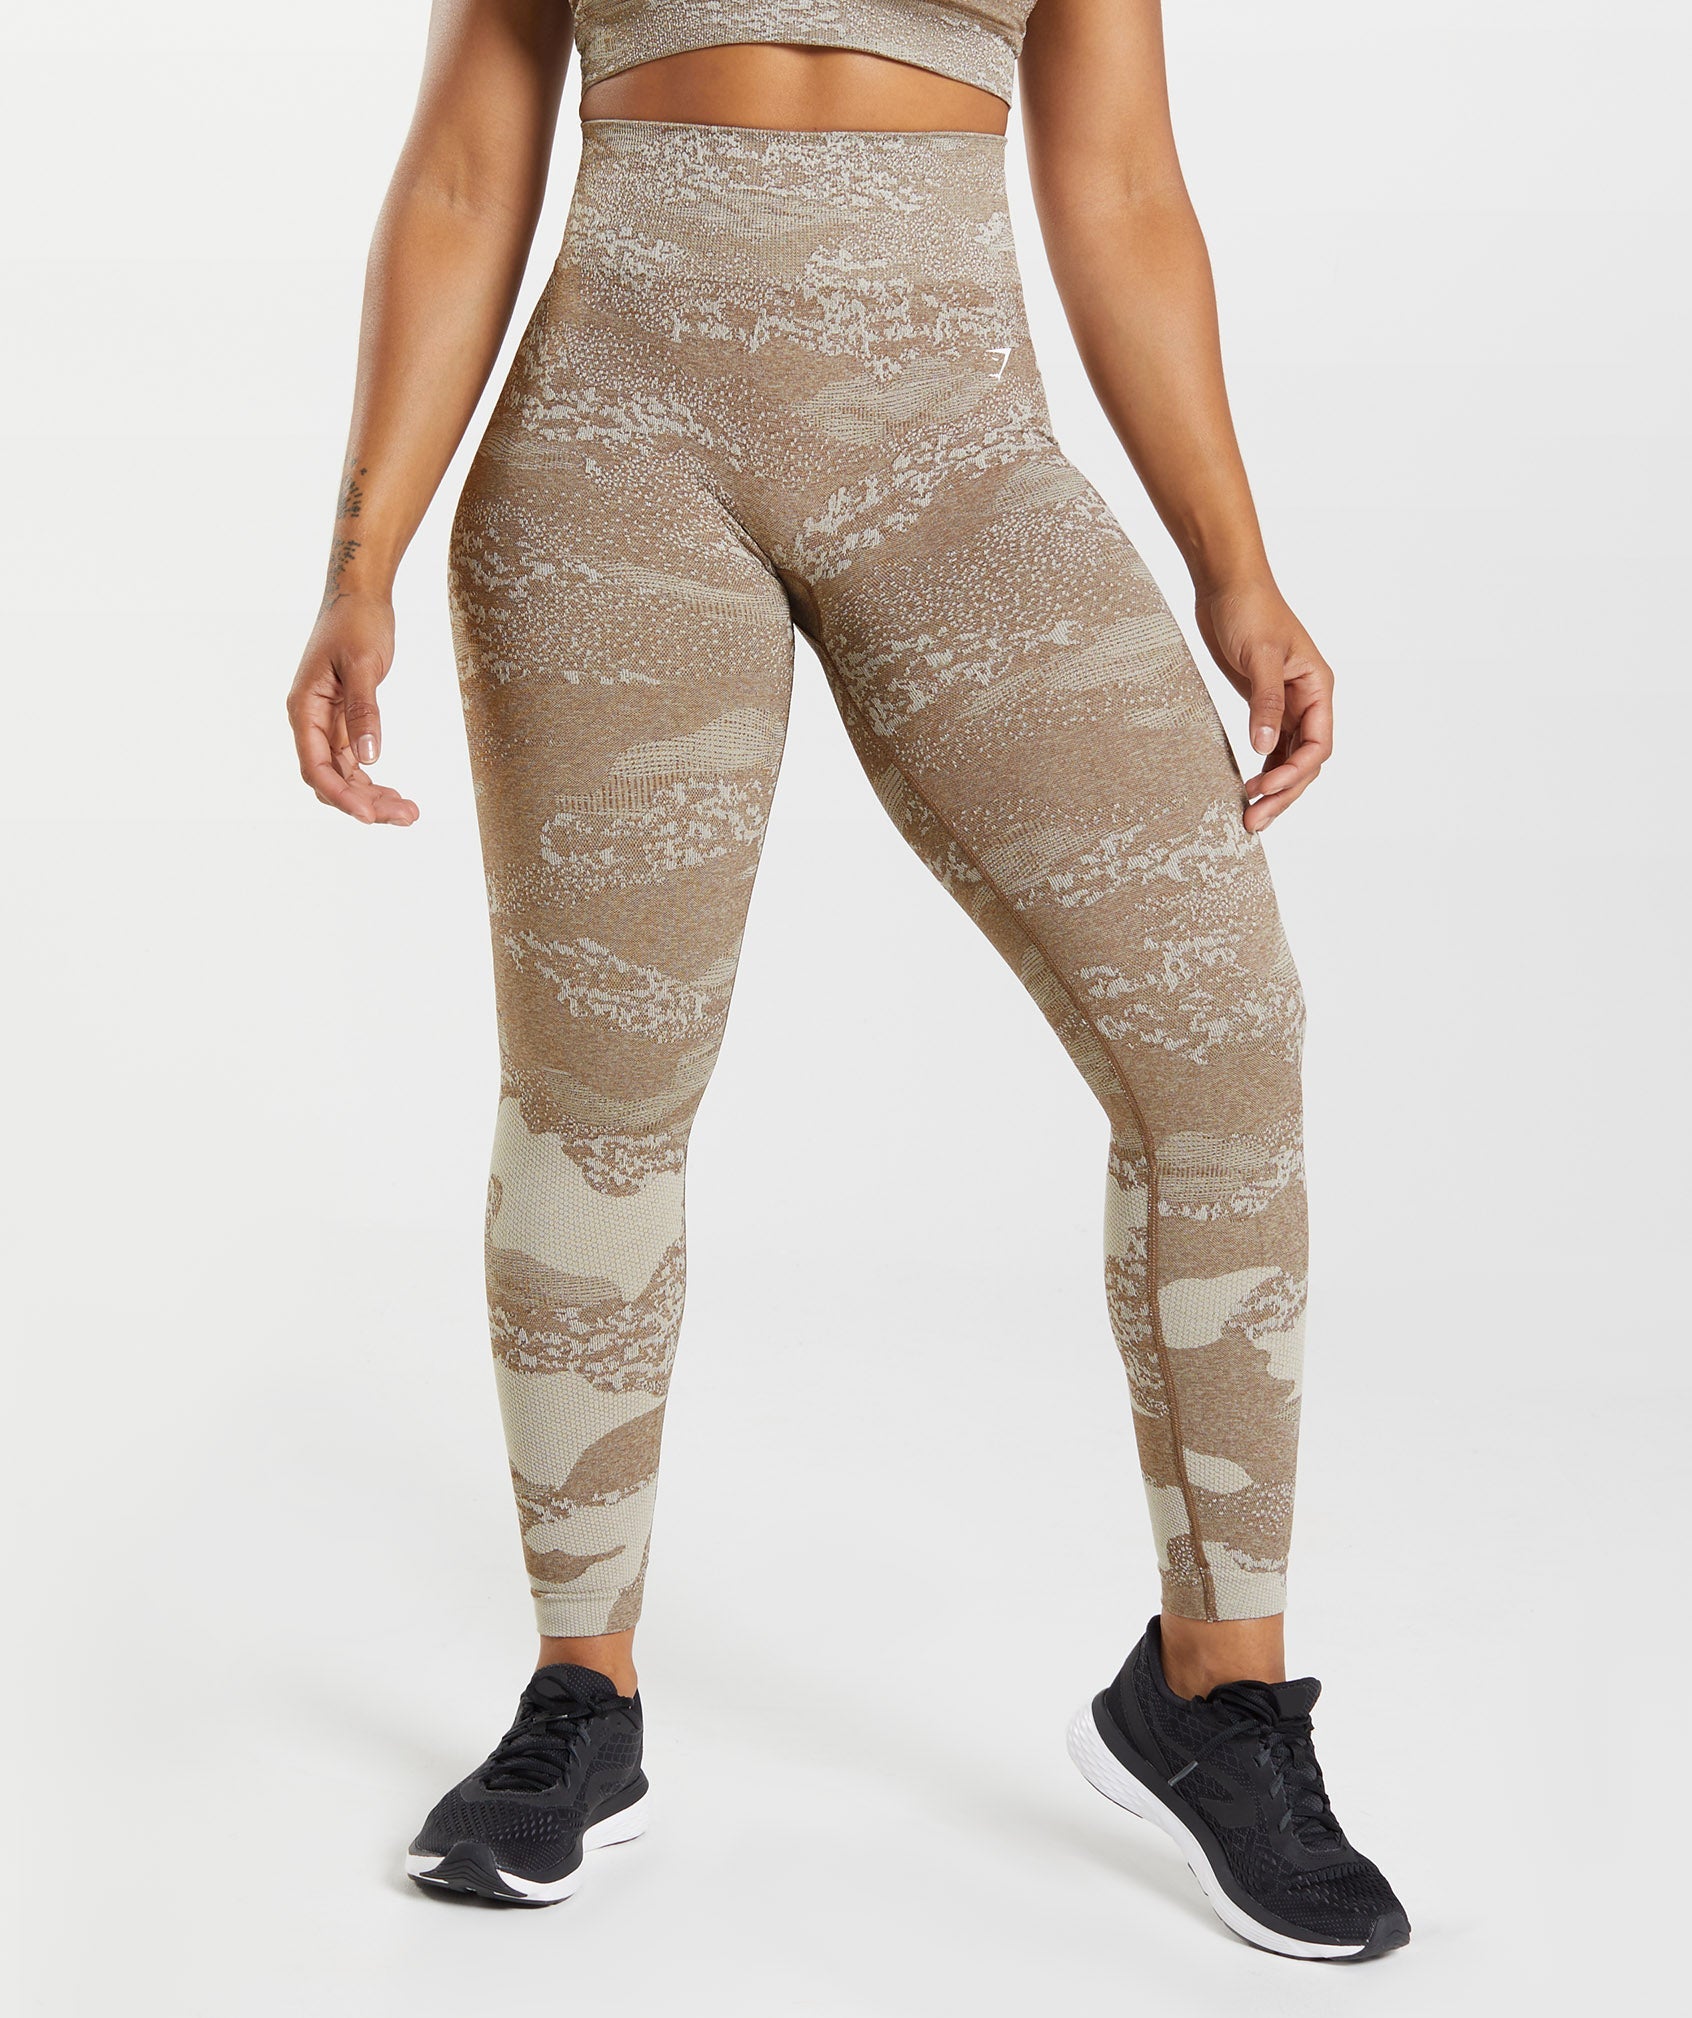 Evolution and Creation Camo Gray Leggings Size M - 15% off